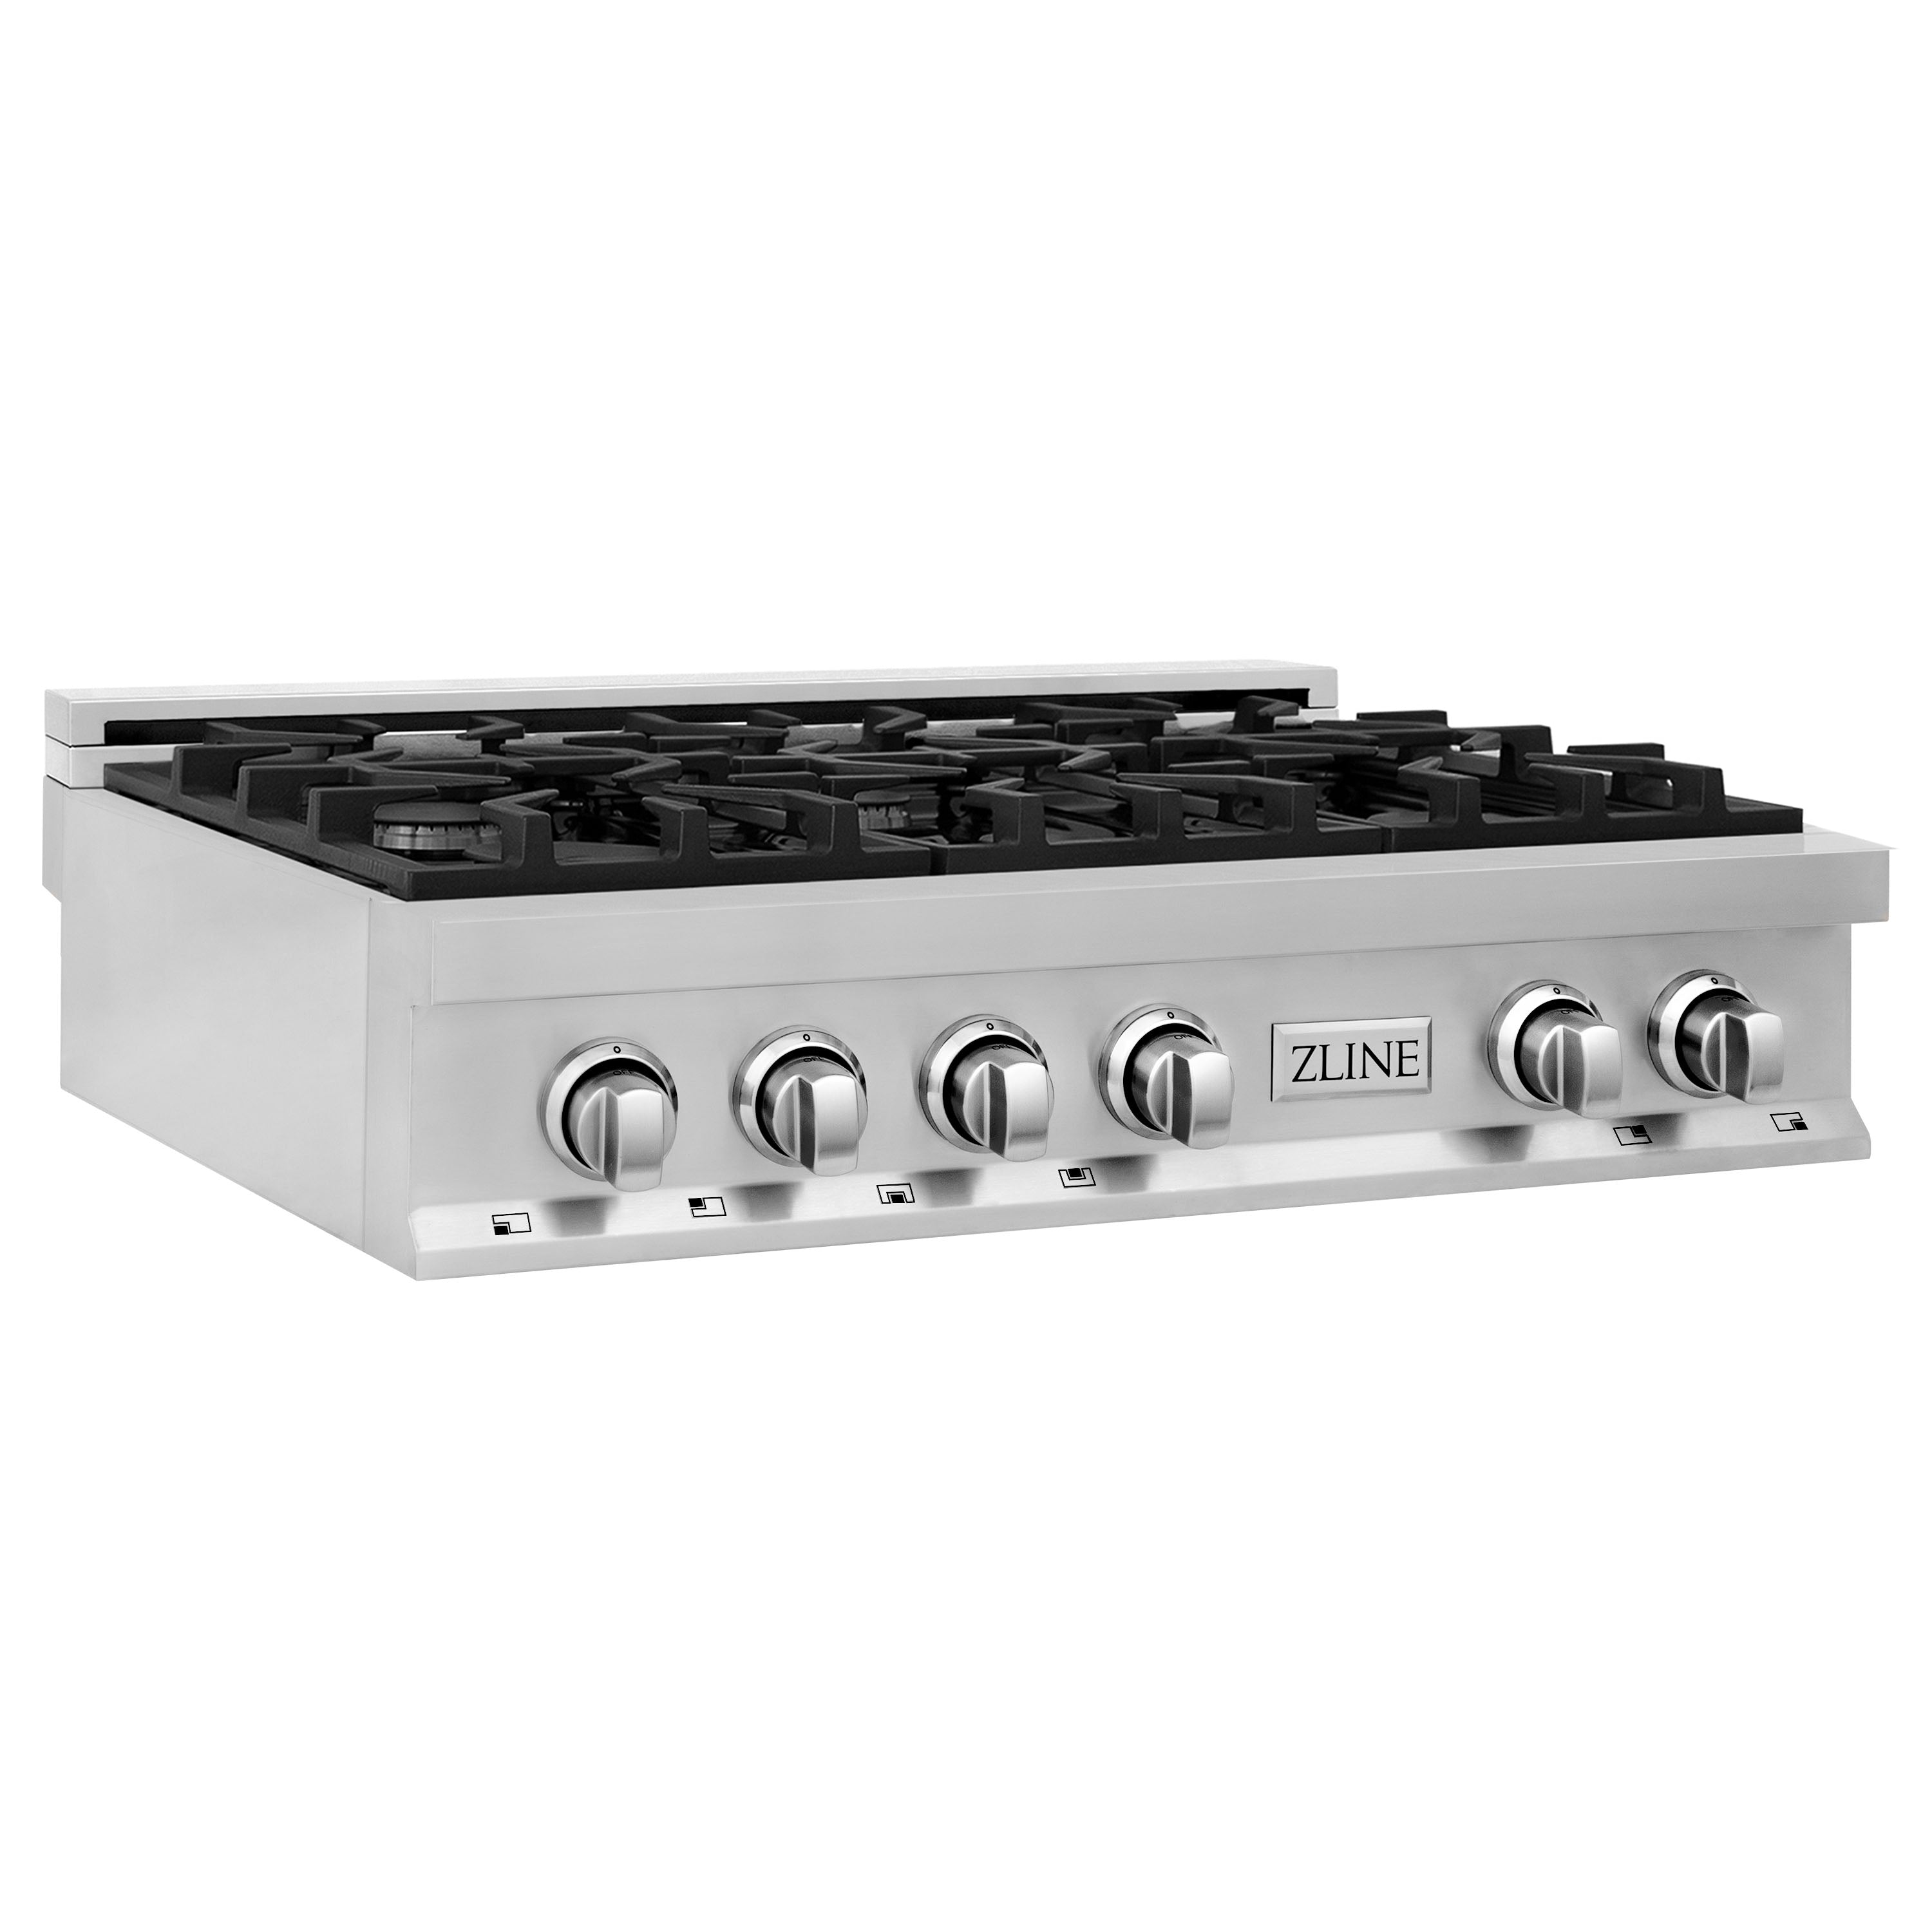 Thor Kitchen 36 in. GAS Rangetop in Stainless Steel with 6 Burners - Hrt3618u